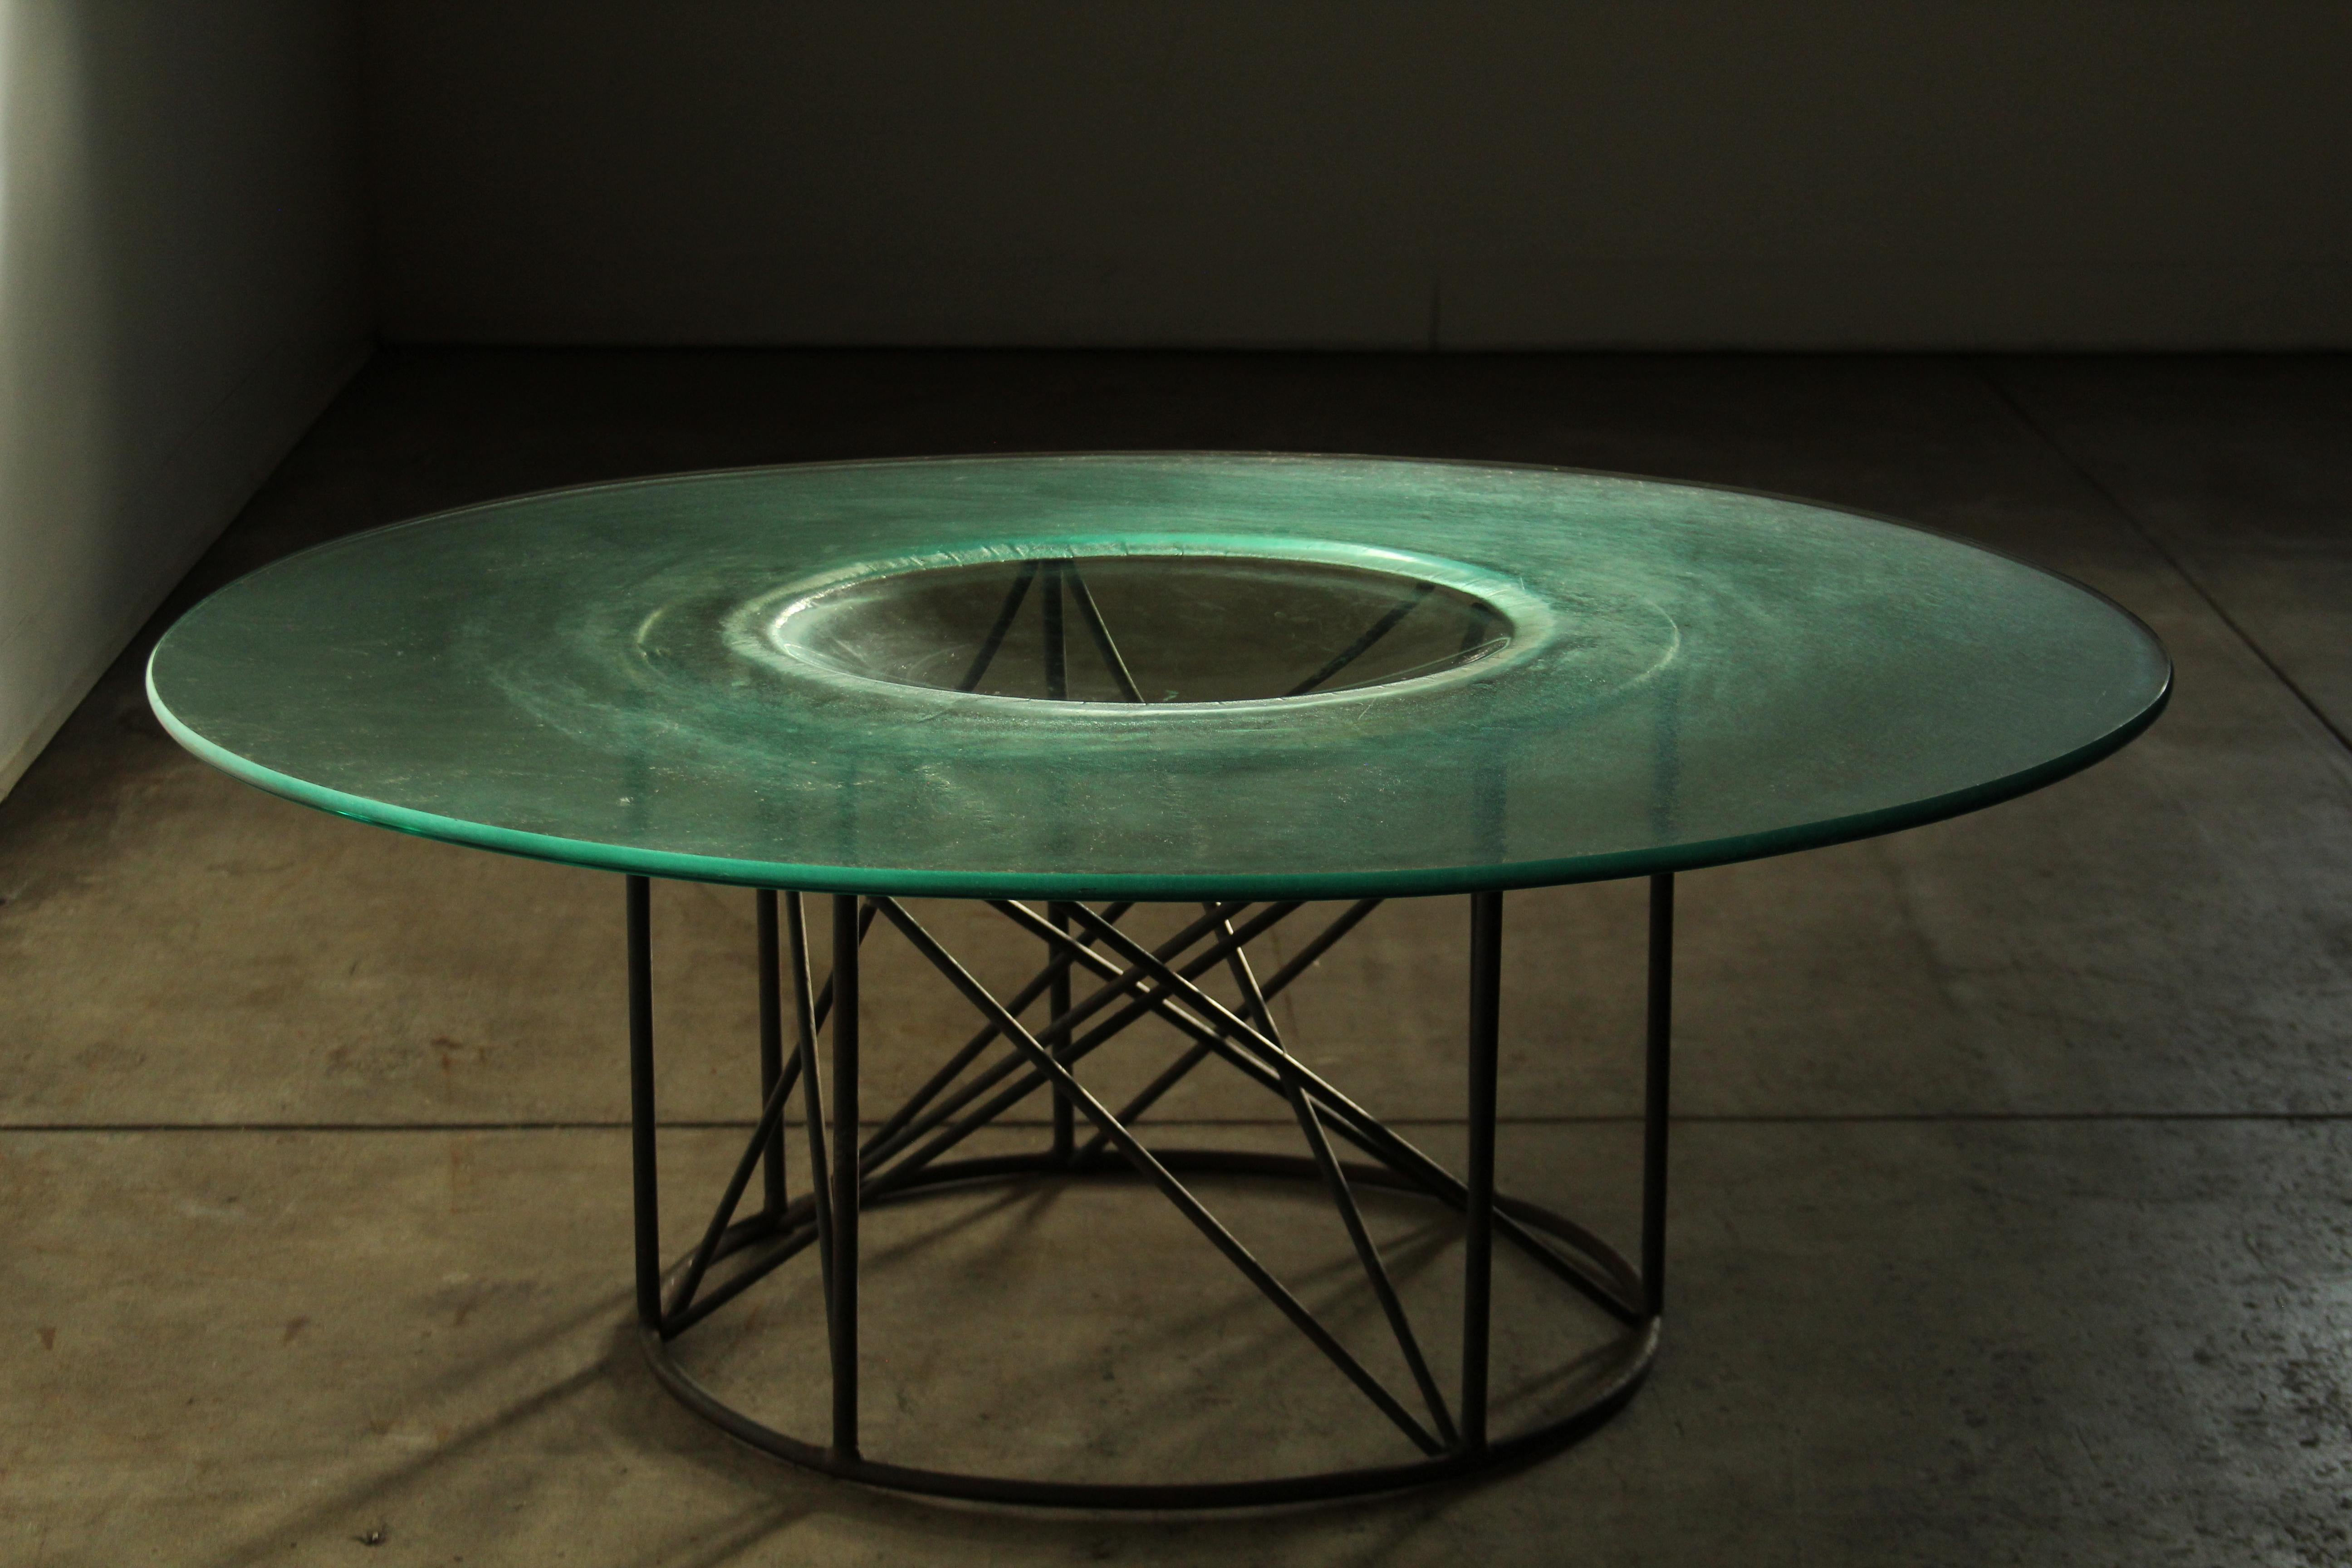 A sublime and unusual modernist coffee table which we believe was made in Mexico in the 1970s. Beautiful welded, steel base with crisscrossing elements. The top consists of a large handblown piece of green tinted glass with rounded edges and a